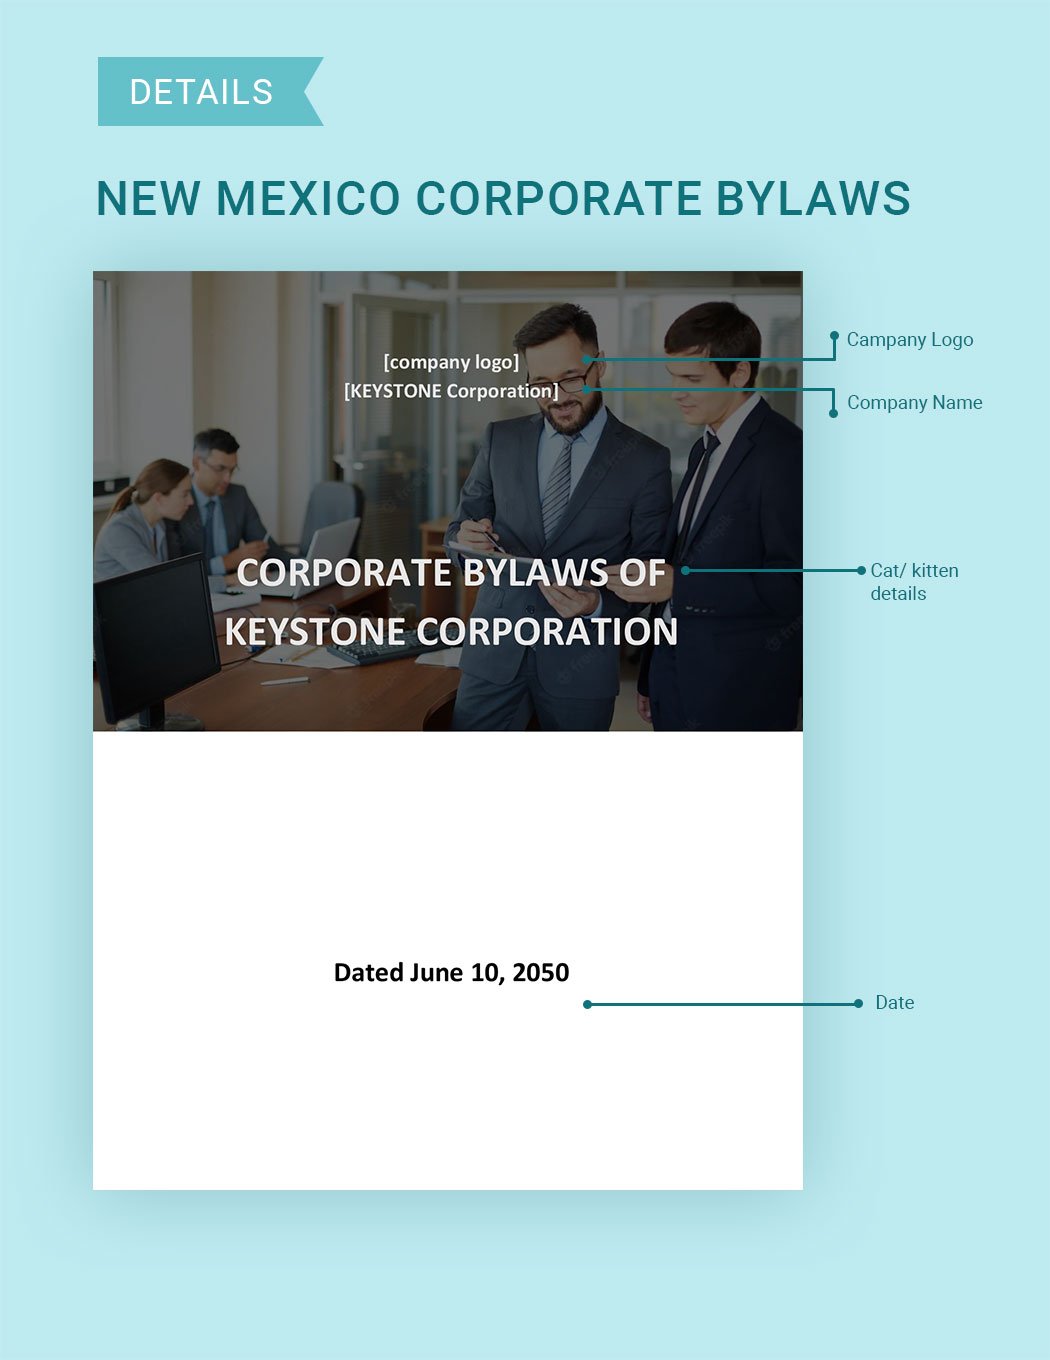 New Mexico Corporate Bylaws Template